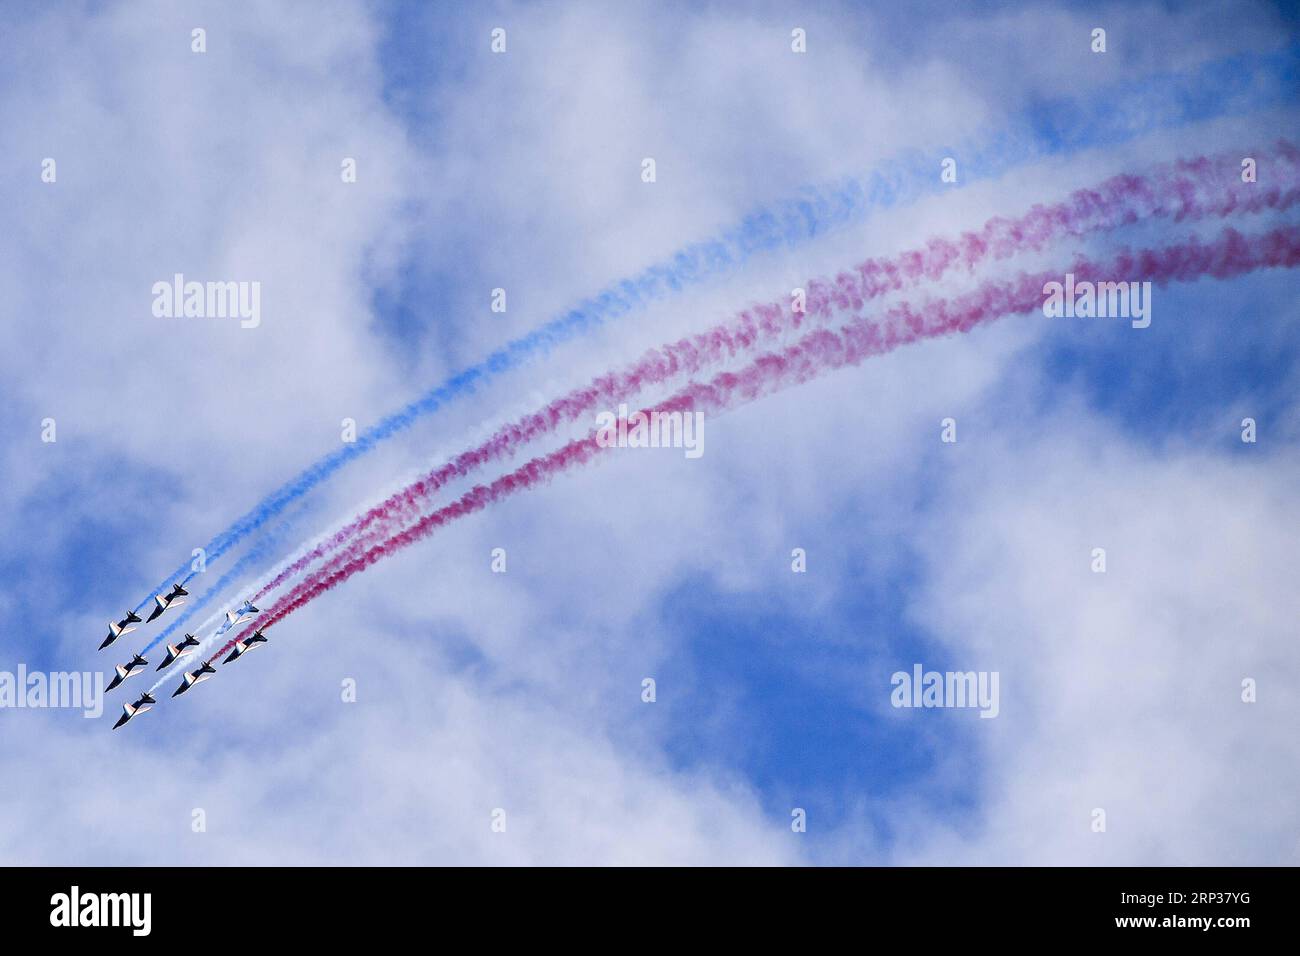 (180924) -- SAINT-HILAIRE, Sept. 24, 2018 (Xinhua) -- Photo taken on Sept. 22, 2018 shows a show of Patrouille de France in Saint-Hilaire, France. The four-day air sports festival, Coupe Icare, concluded on Sunday. On its 45th edition, the Coupe Icare this year attracted about 700 accredited pilots and over 90,000 spectators. (Xinhua/Chen Yichen) (SP)FRANCE-SAINT-HILAIRE-AIR SPORTS-45TH COUPE ICARE PUBLICATIONxNOTxINxCHN Stock Photo